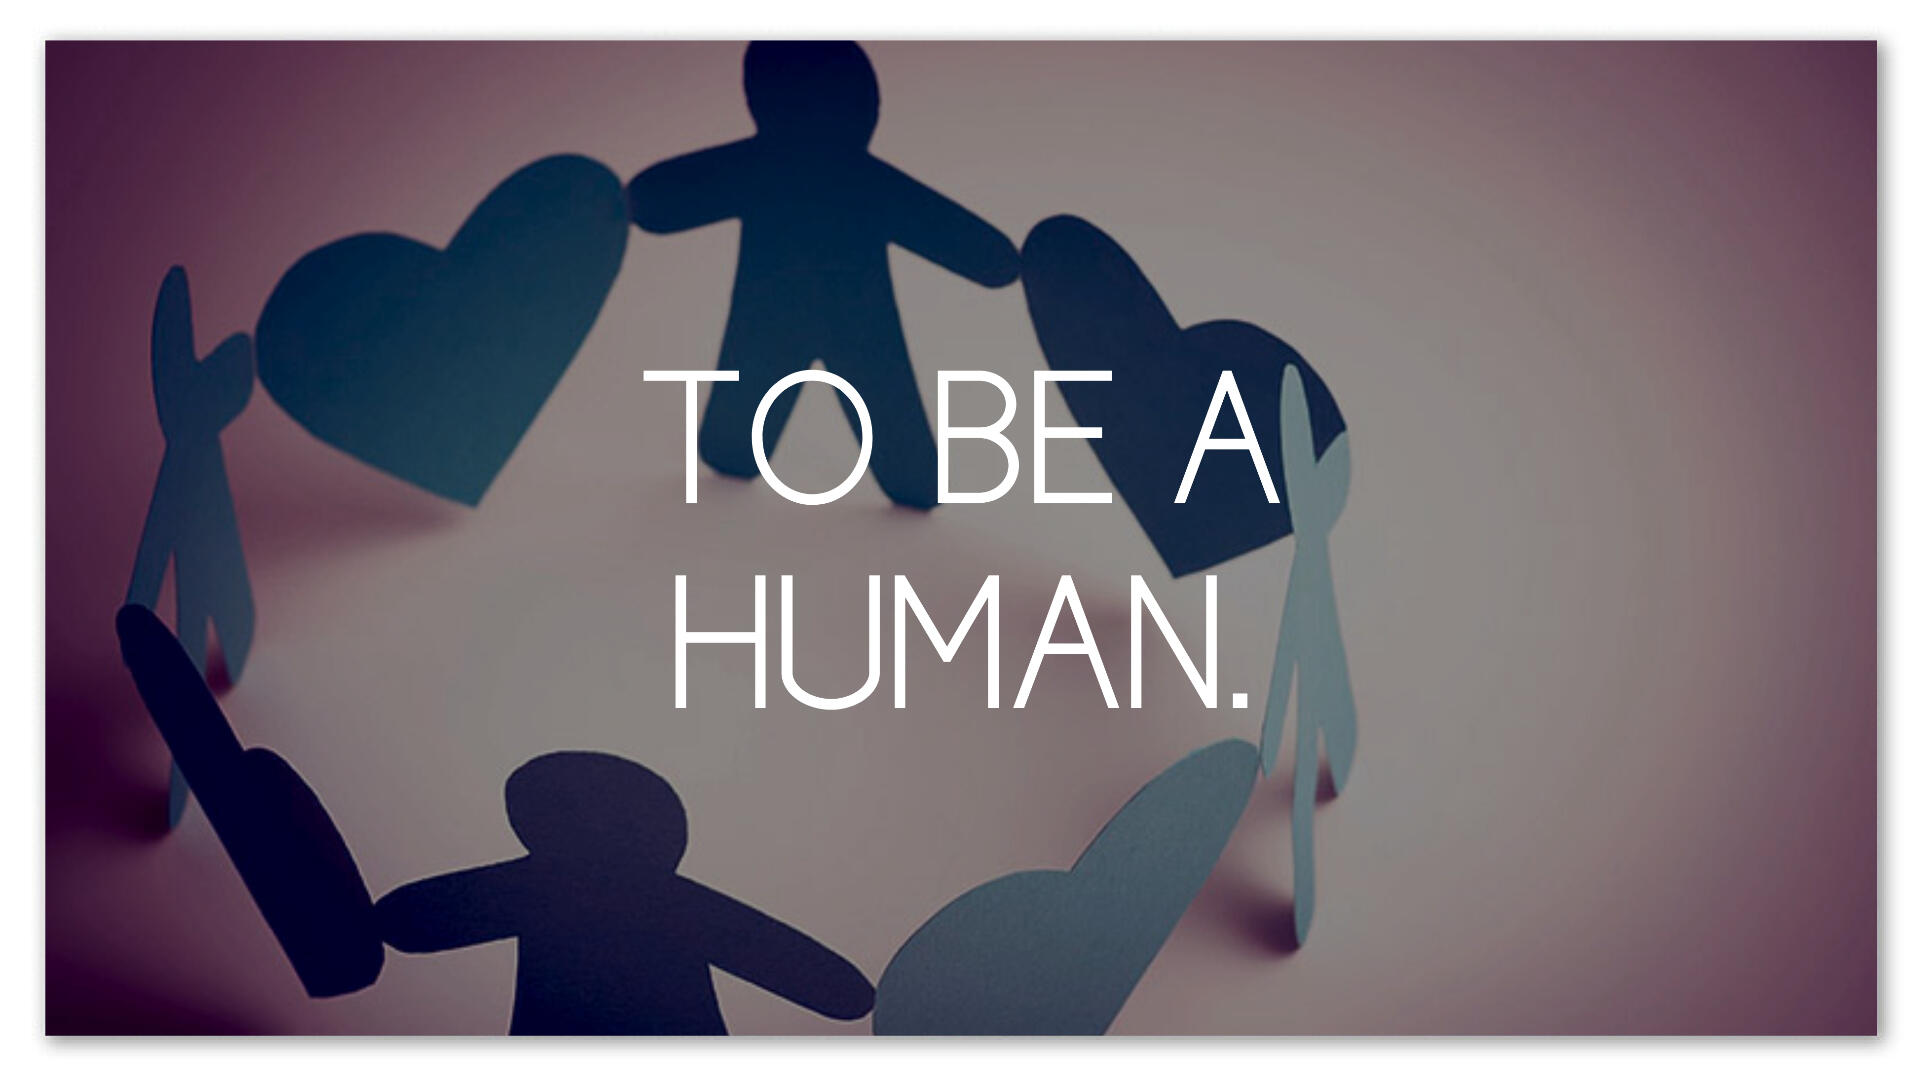 To be a human.